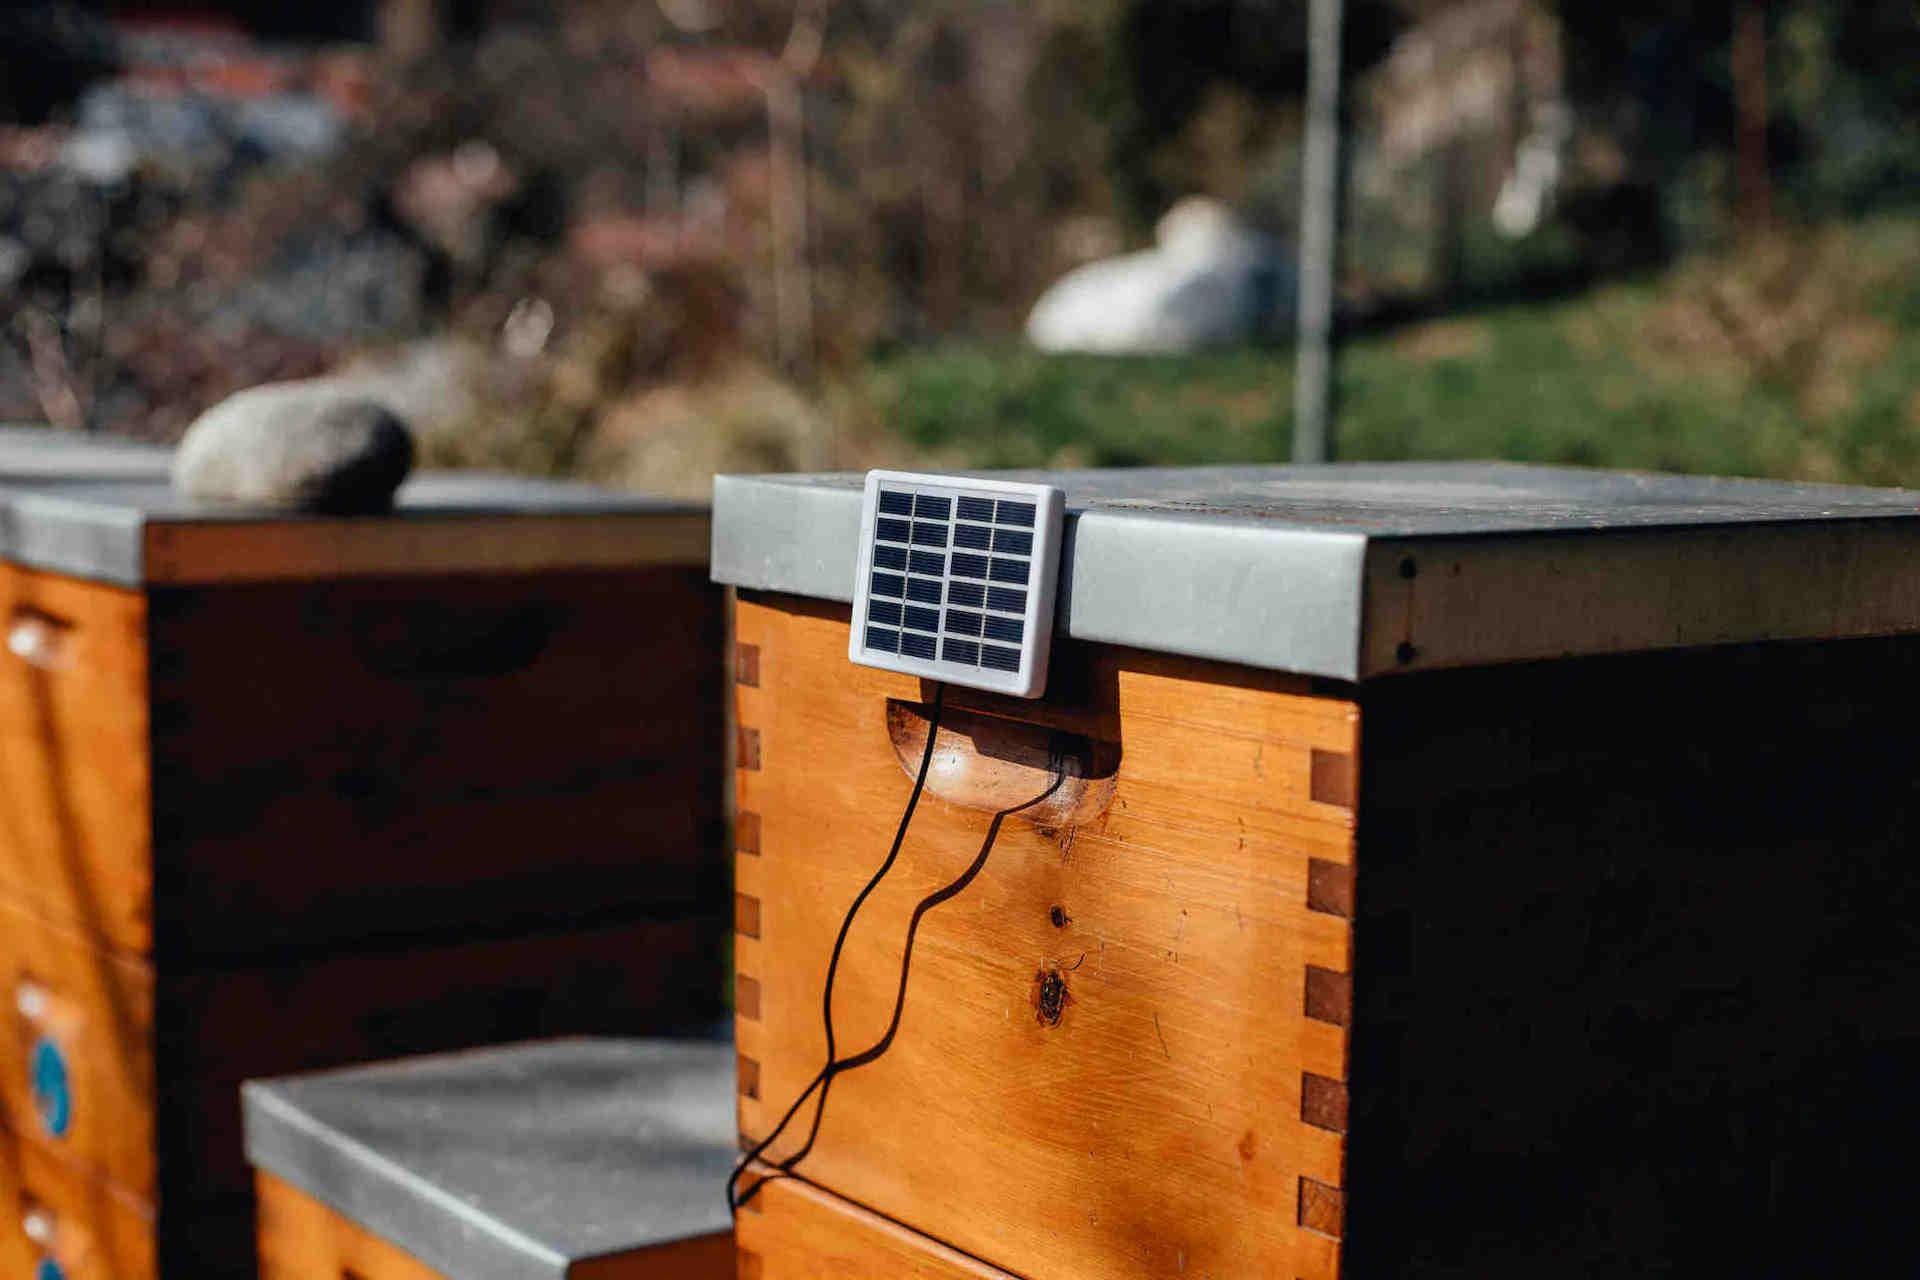 3Bee technology and monitoring systems